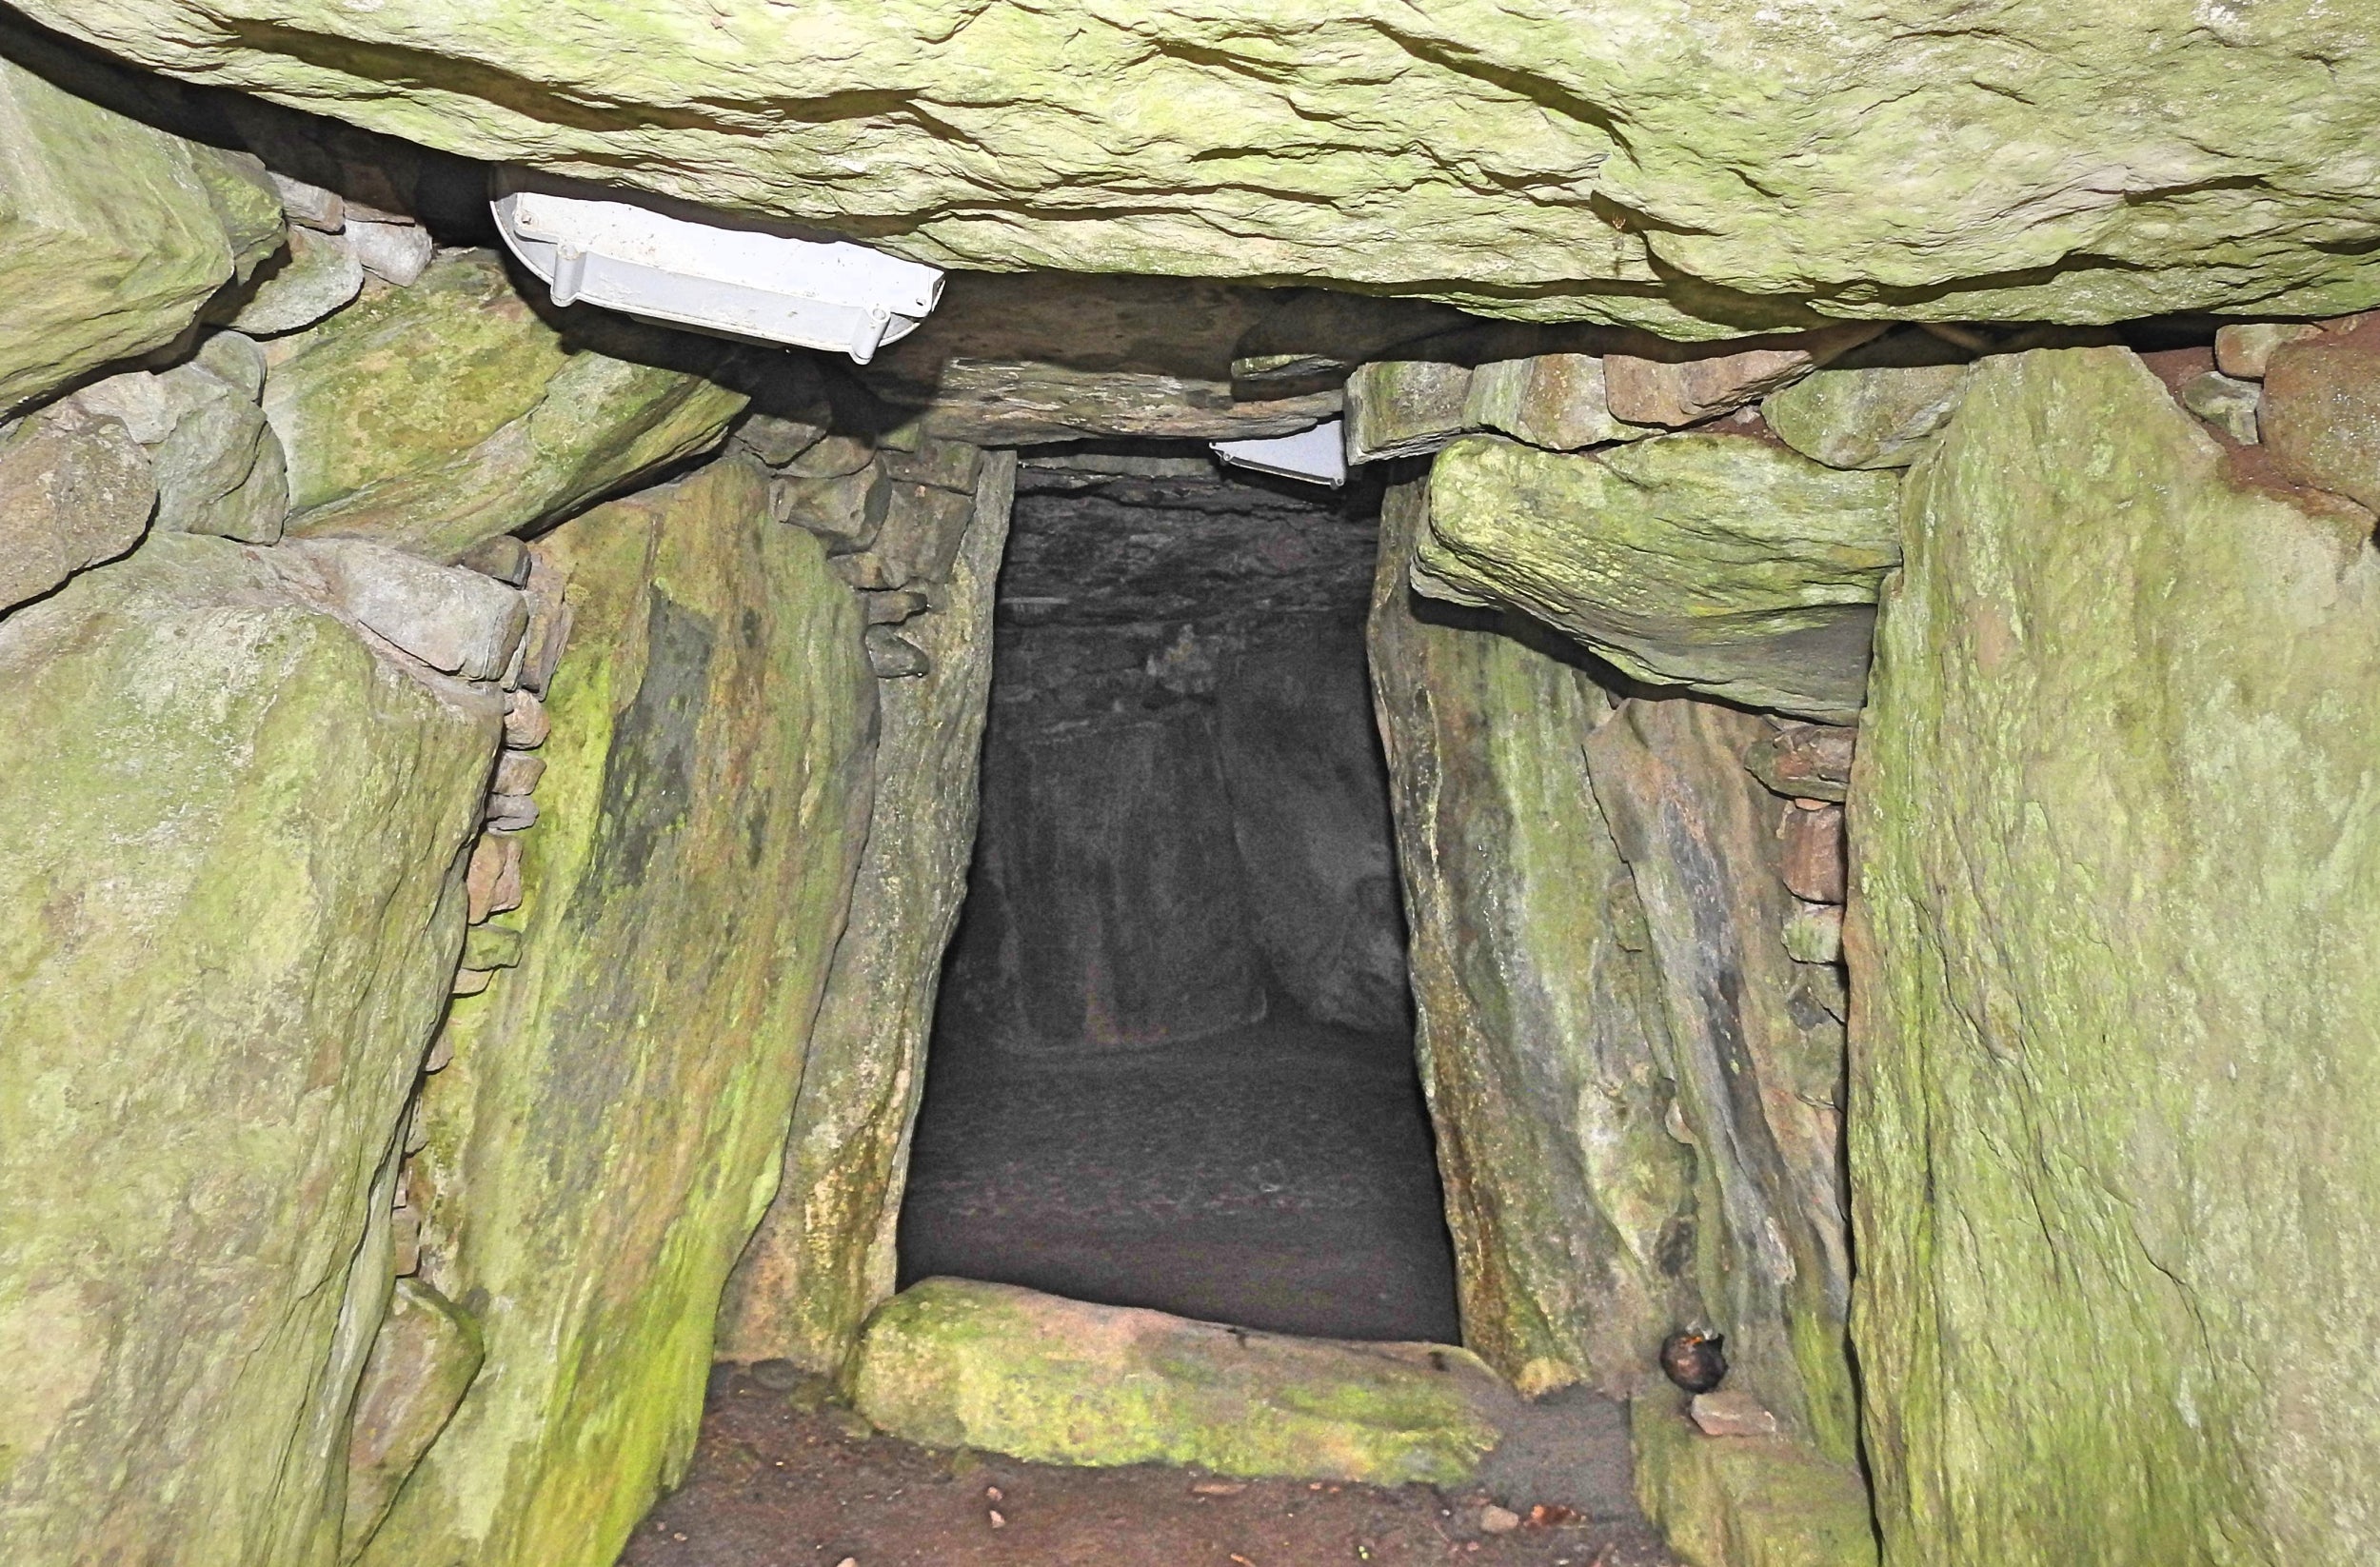 Into darkness: inside the Dowth Megalithic Passage Tomb